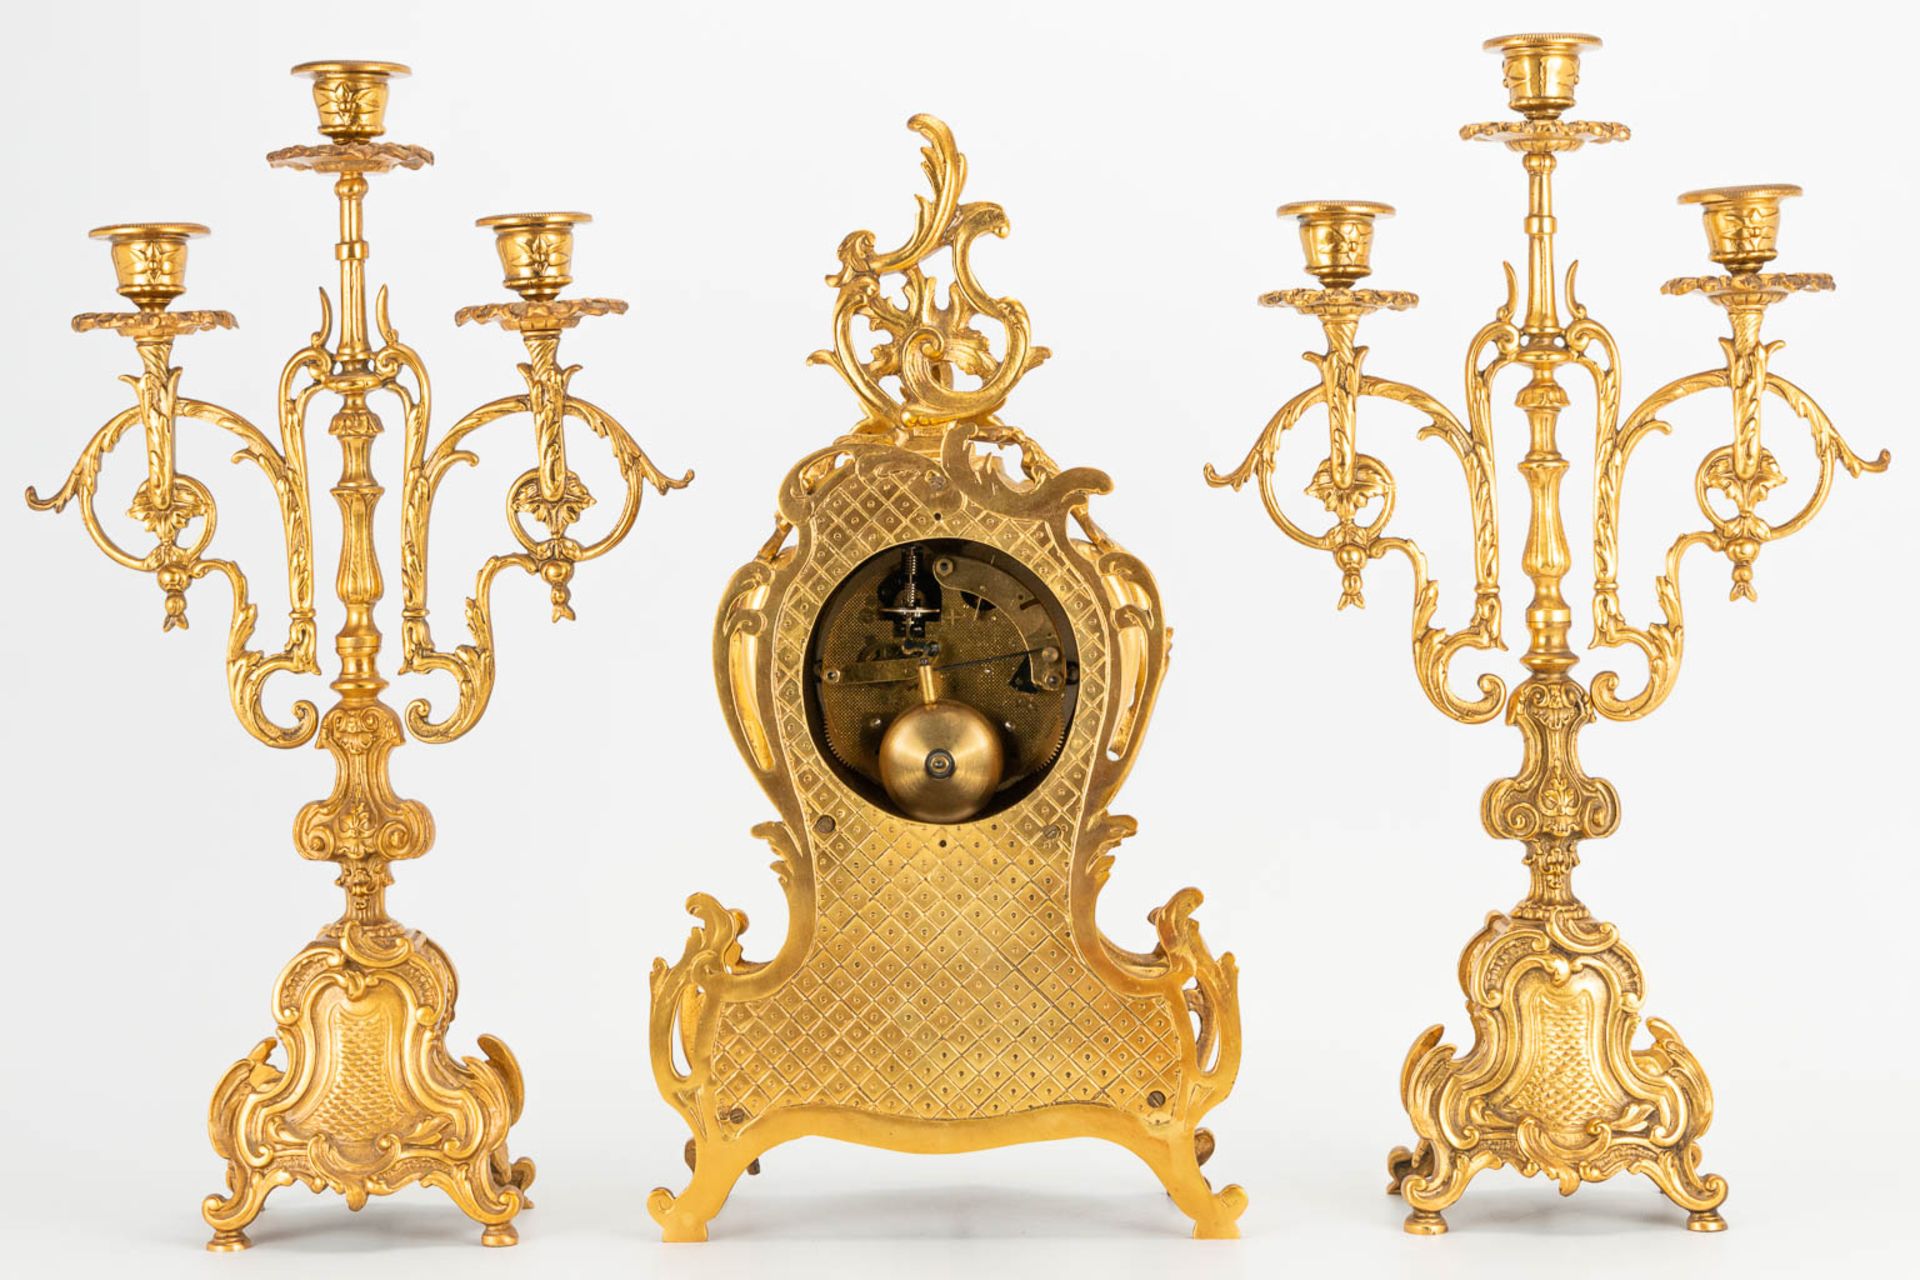 A 3 piece garniture clockset made of bronze, consisting of a clock and 2 candelabra. (9 x 22 x 41 cm - Image 10 of 17